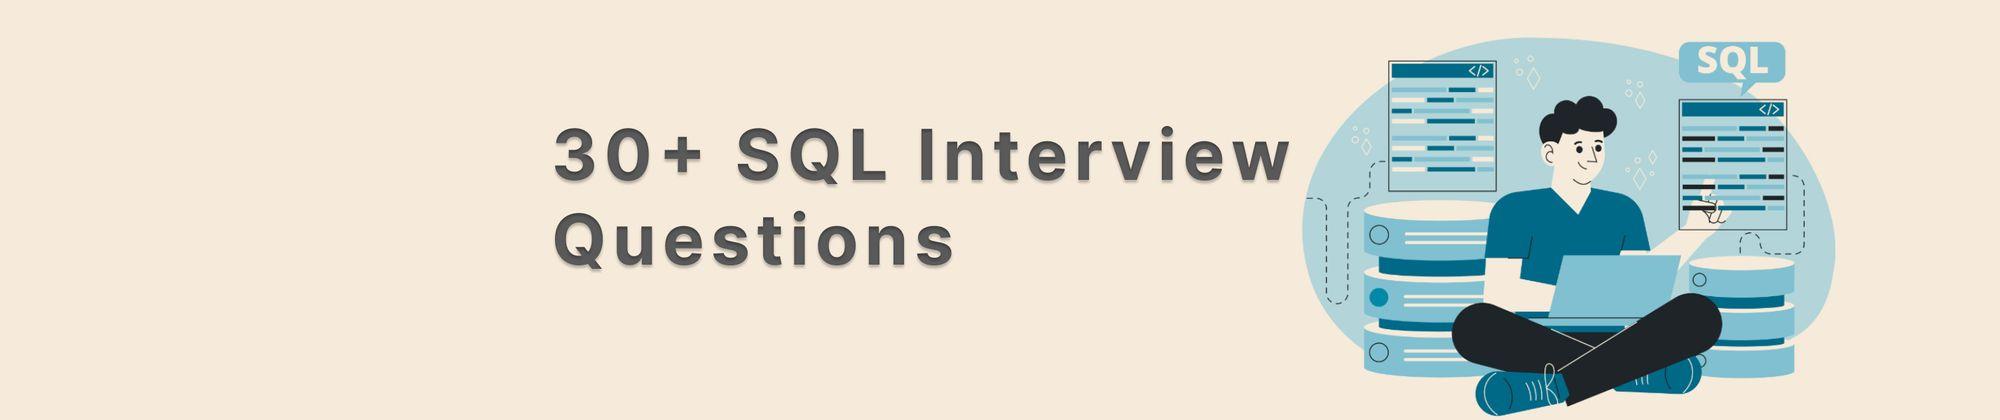 A comprehensive list of over 30+ SQL interview questions along with their answers